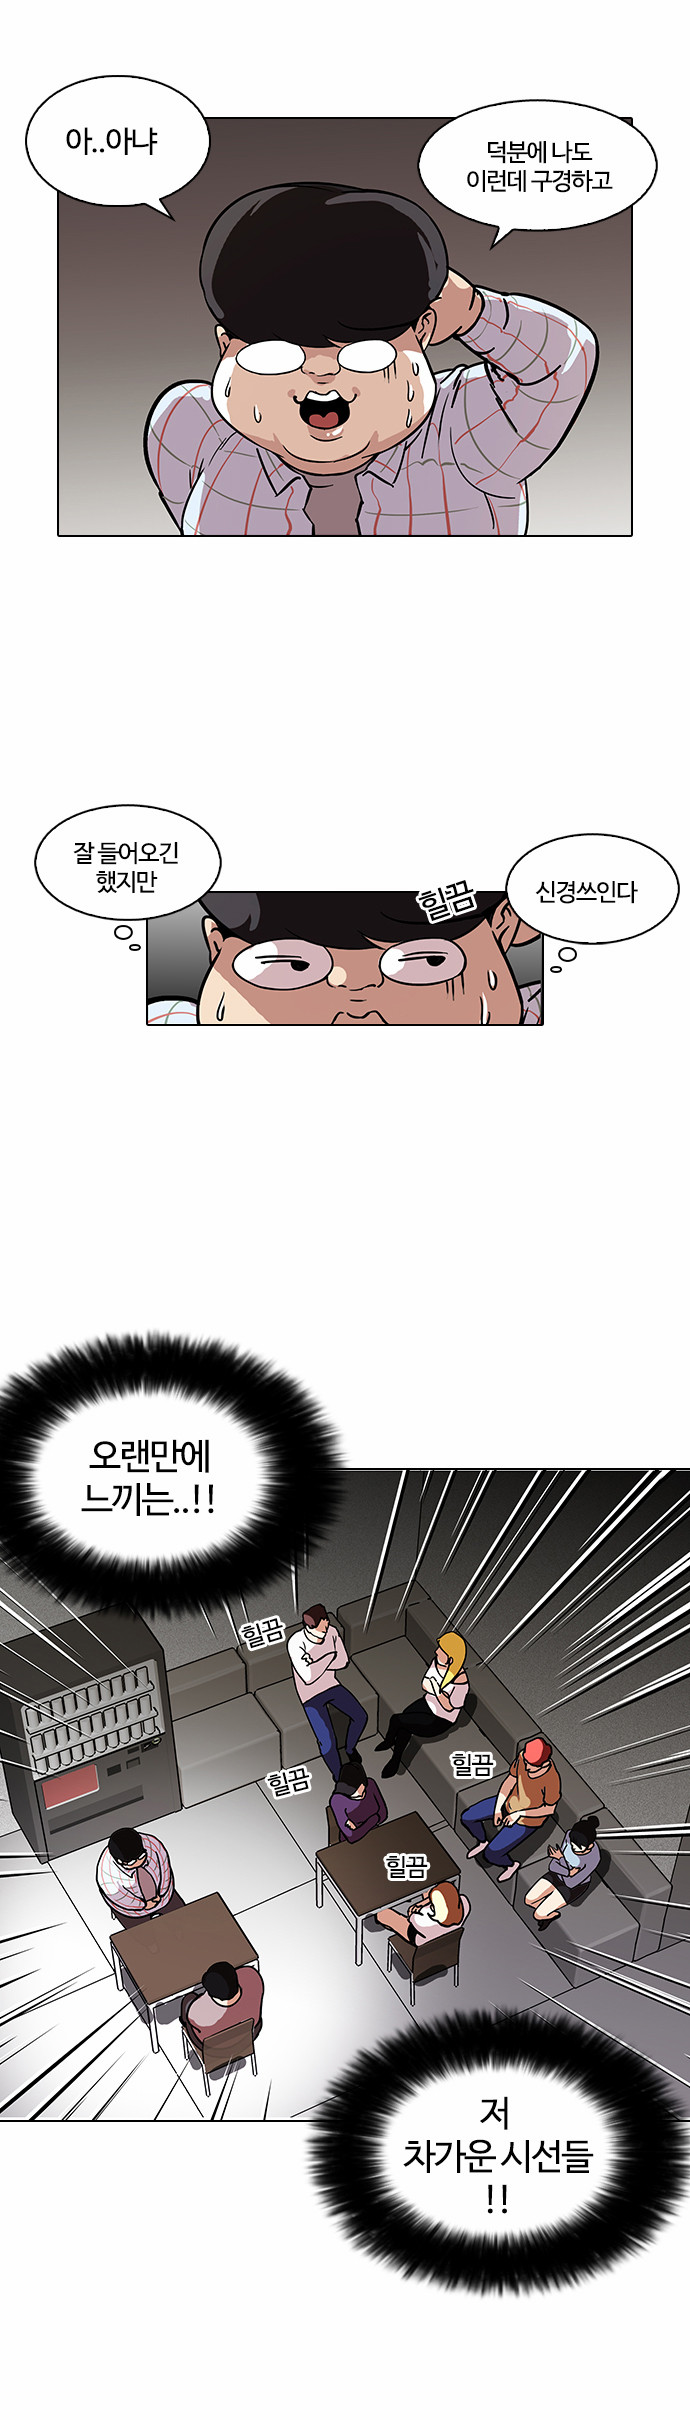 Lookism - Chapter 103 - Page 2